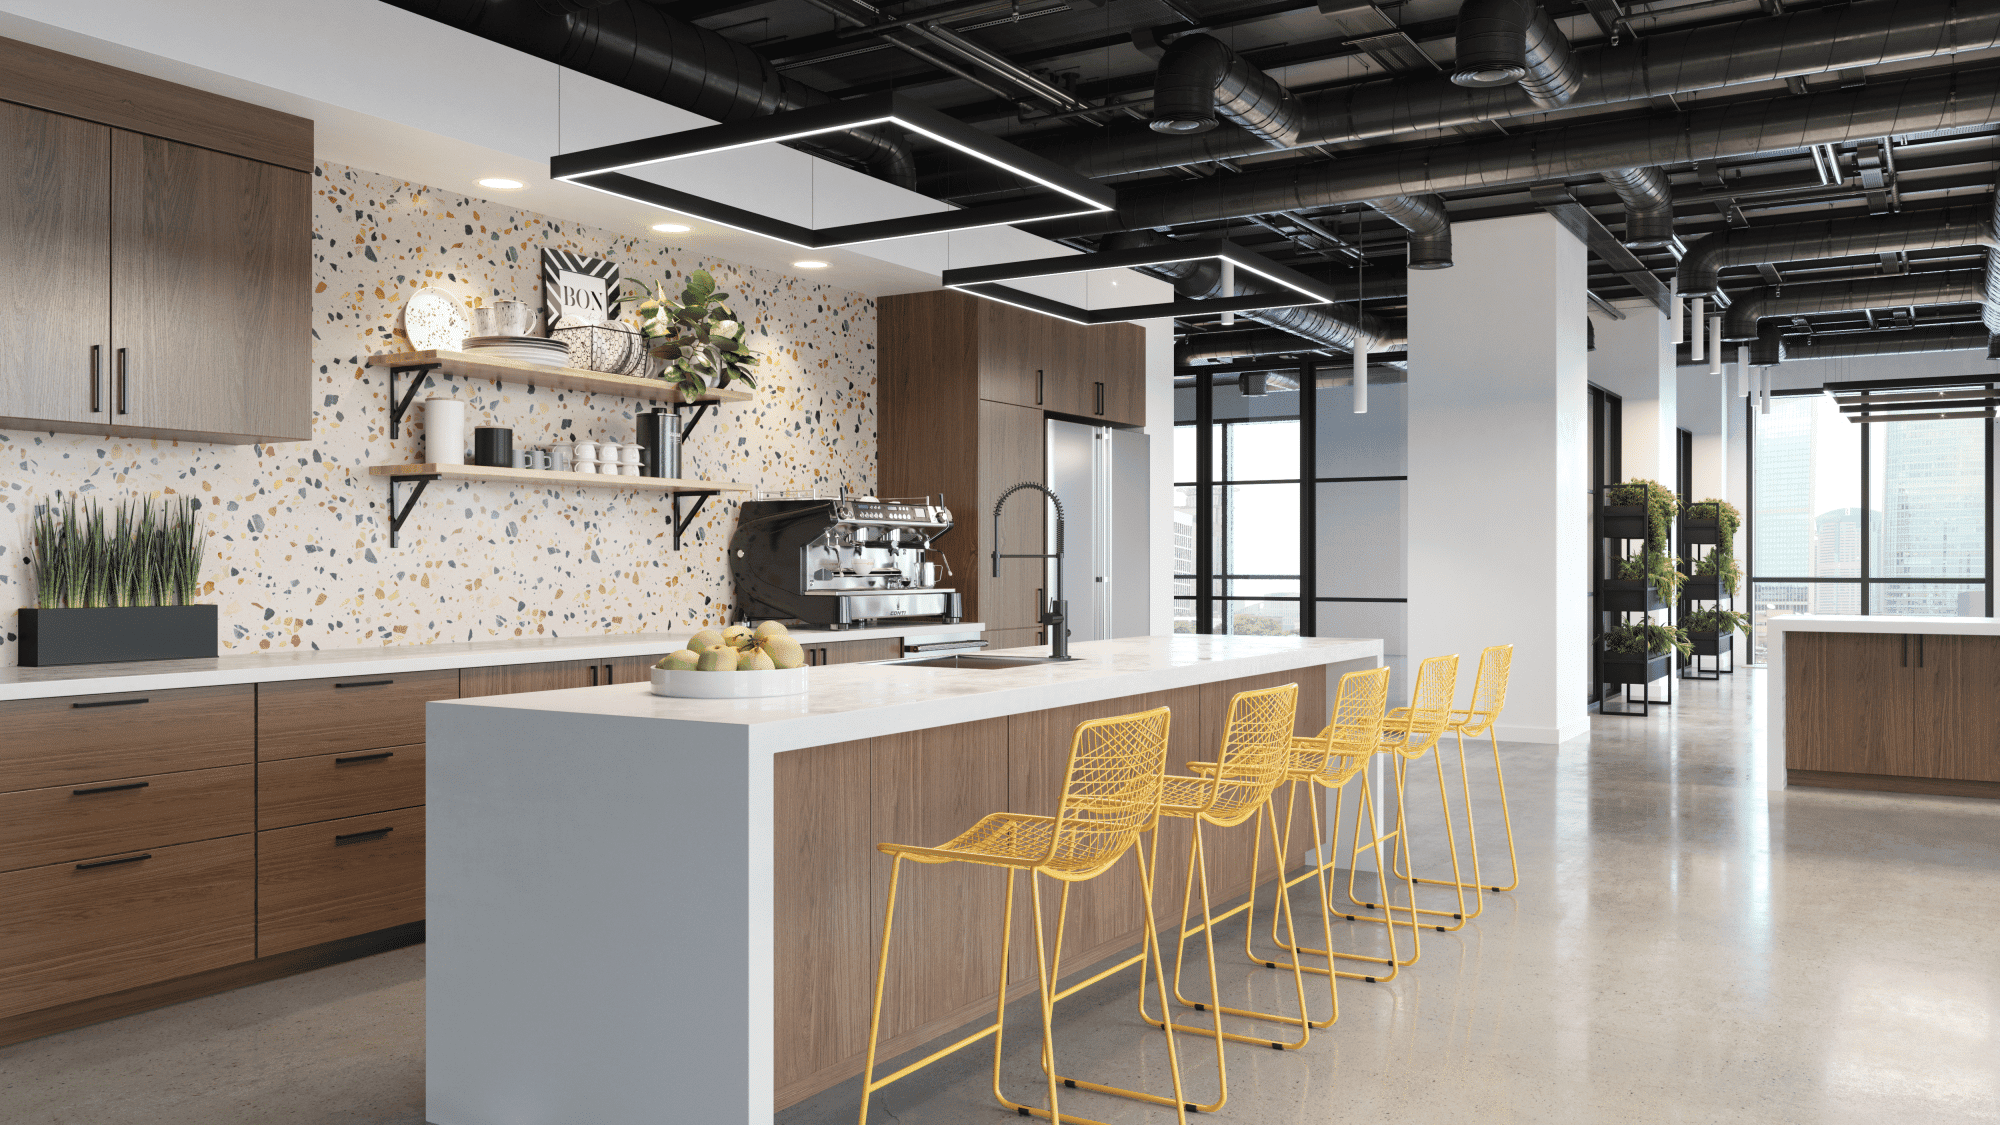 Modern office kitchen with a central island, yellow bar stools, wooden cabinets, and an artistic backsplash.